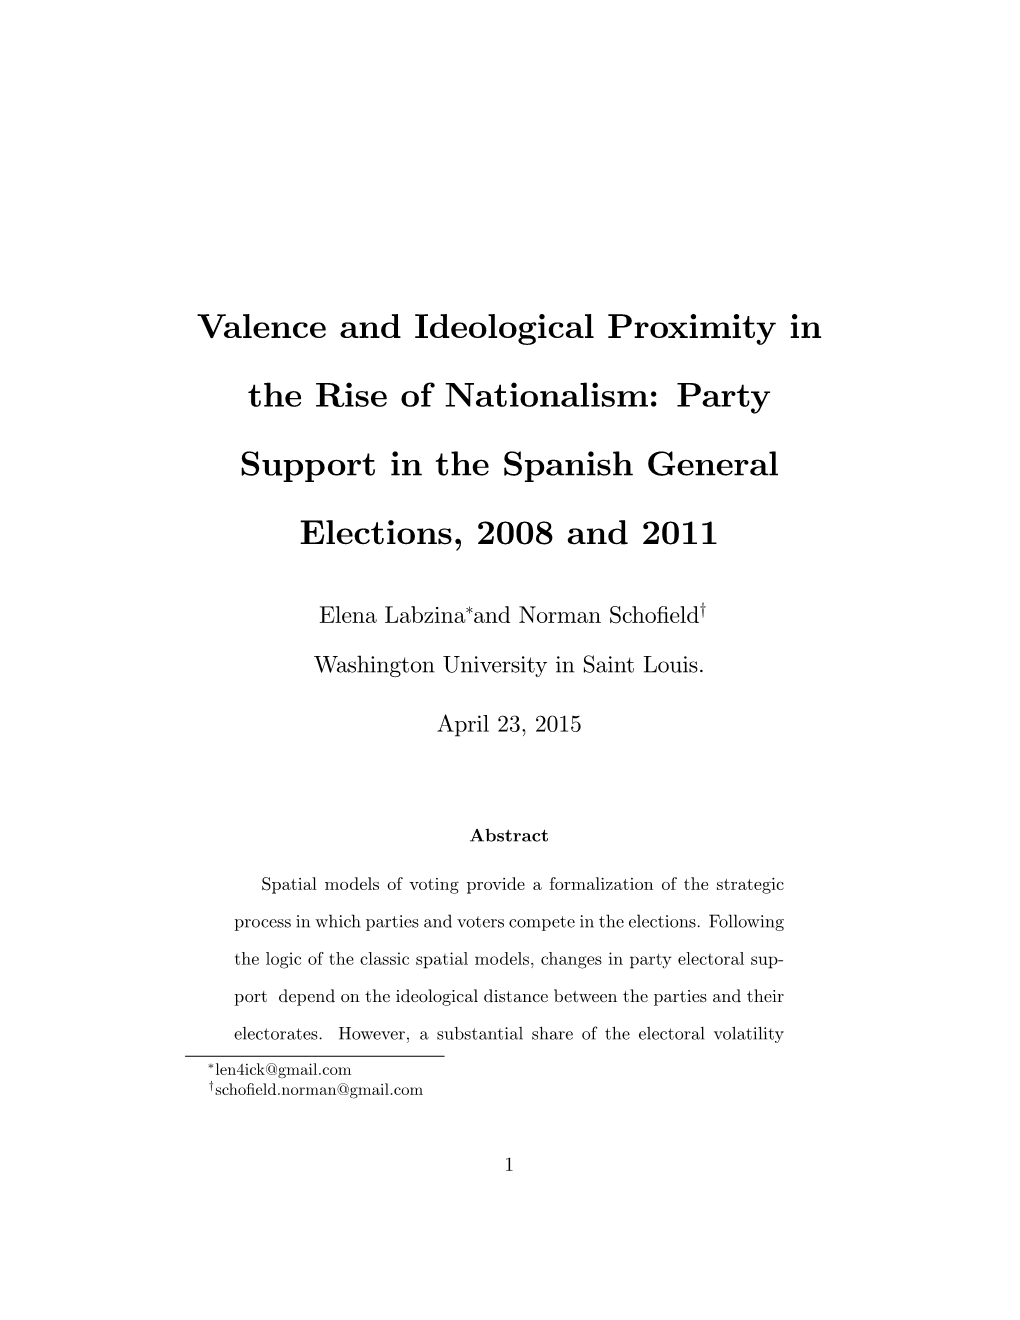 Valence and Ideological Proximity in the Rise of Nationalism: Party Support in the Spanish General Elections, 2008 and 2011